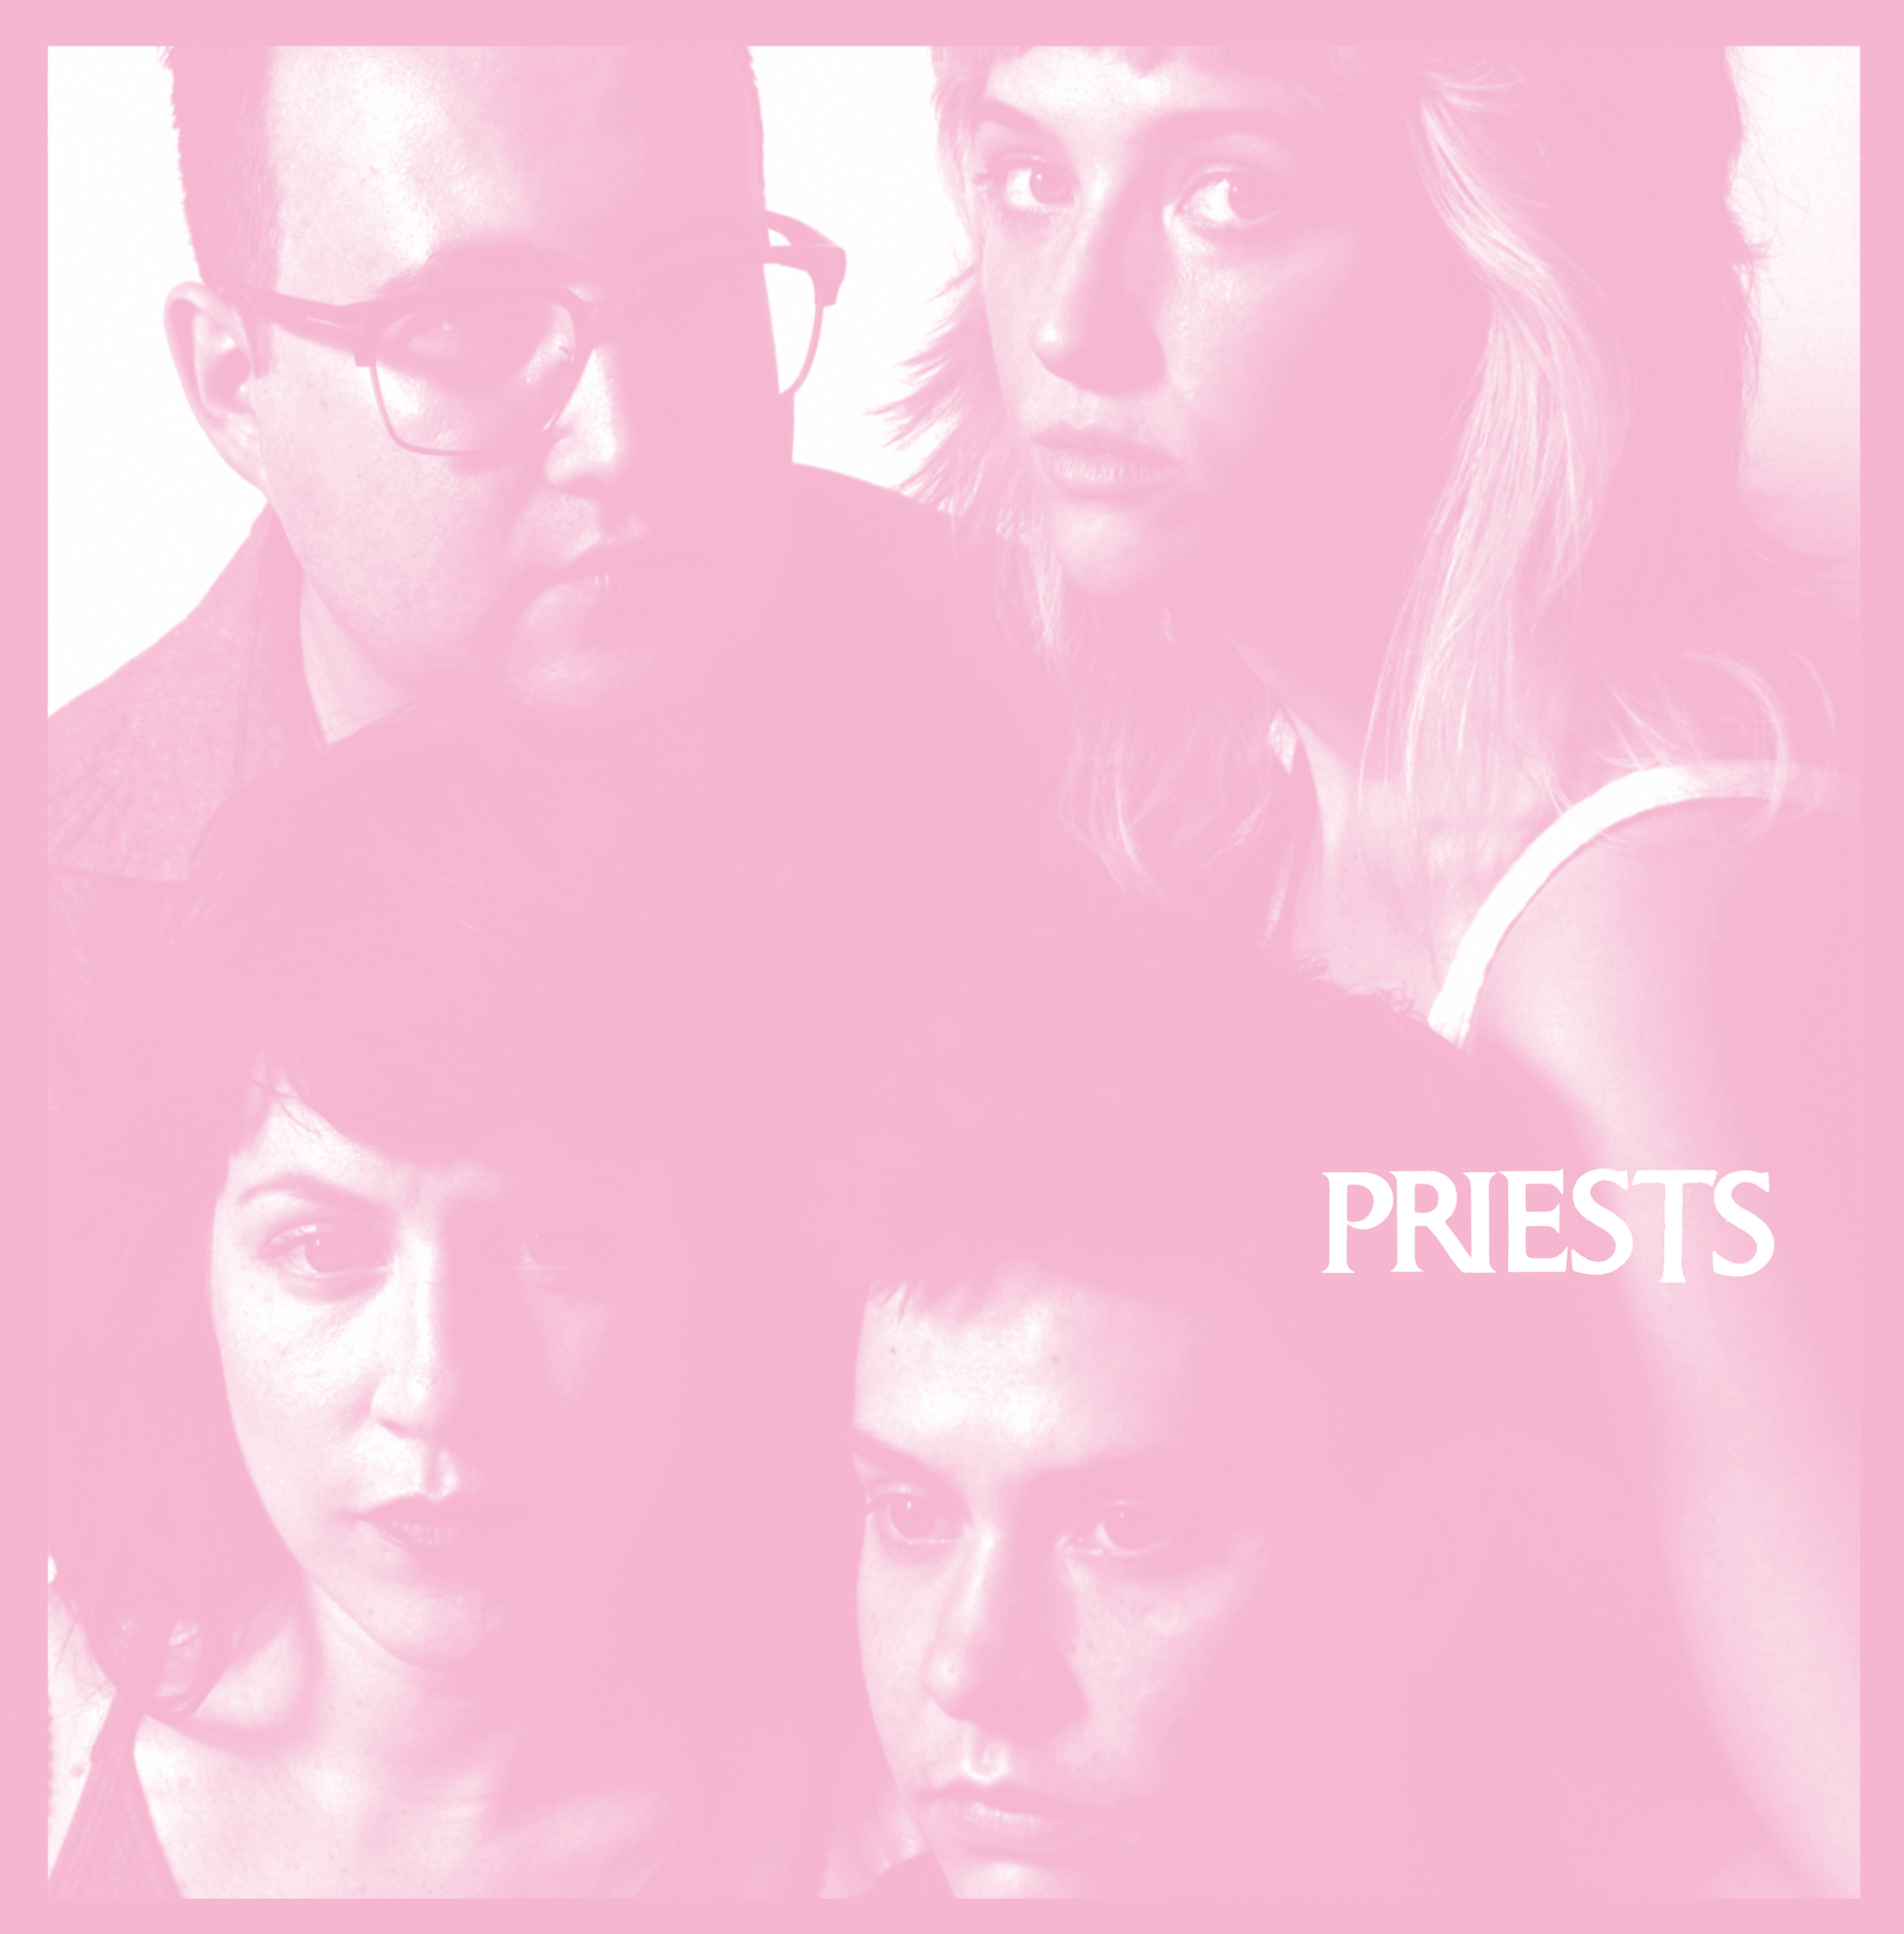 Priests Announce Debut Full-Length <em>Nothing Feels Natural</em>, Share “JJ” Video” title=”PRIESTS NFN LP COVER low-res” data-original-id=”211759″ data-adjusted-id=”211759″ class=”sm_size_full_width sm_alignment_center ” />
</p>		</div>
				</div>
						</div>
					</div>
		</div>
								</div>
					</div>
		</section>
				<section data-particle_enable=